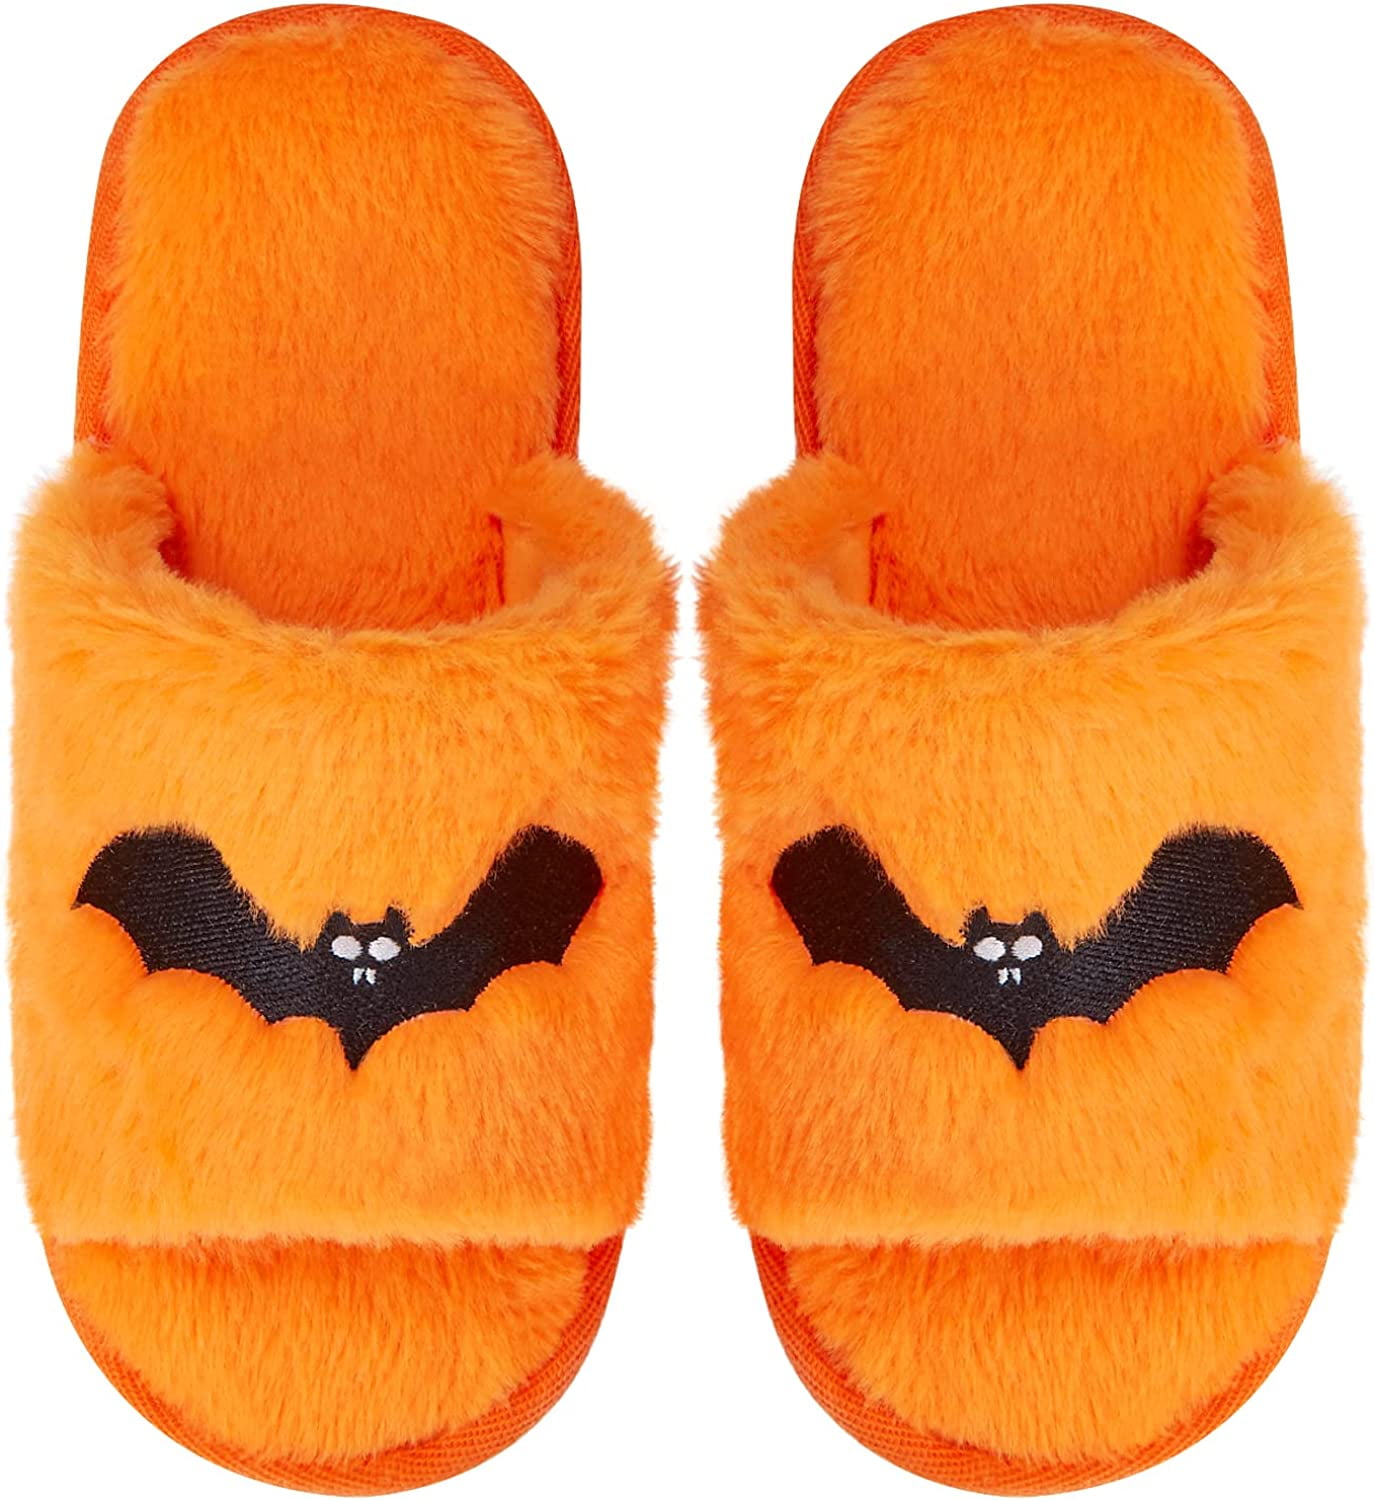 PIKADINGNIS Halloween Slippers Pumpkin Slippers Women Cartoon Furry Face House Shoes Memory Foam Non-slip Rubber Sole Slip Home Shoes Indoor and Outdoor Halloween Gifts for Girls Ladies - Walmart.com